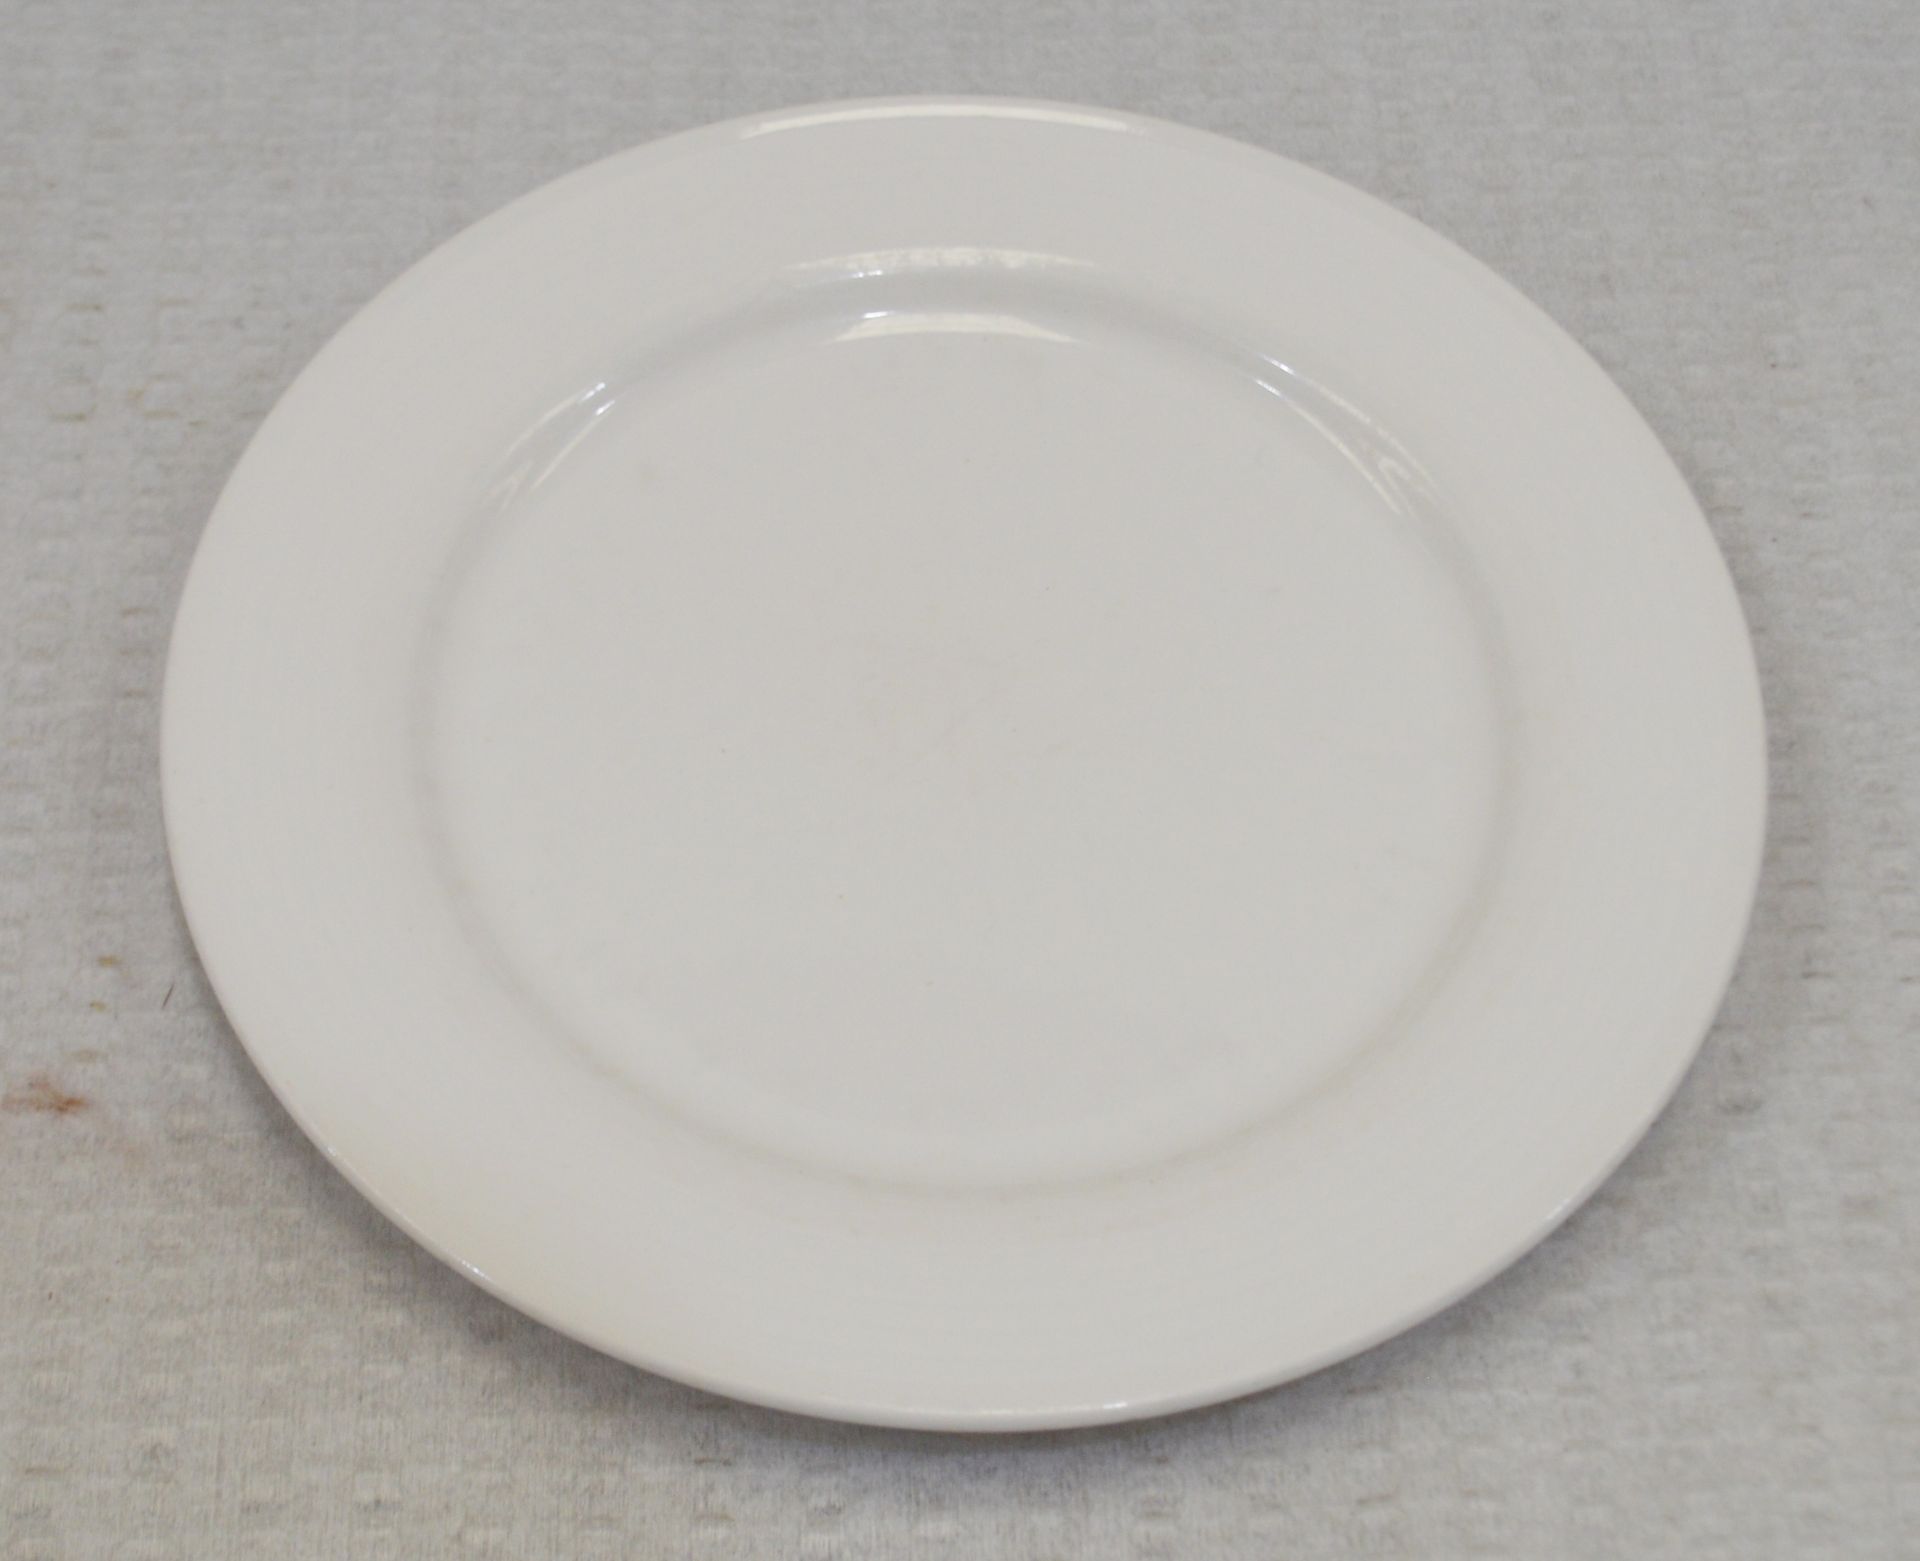 54 x Villeroy & Boch Dinner Plates - Dimensions: 27cm – Recently Removed From a Commercial